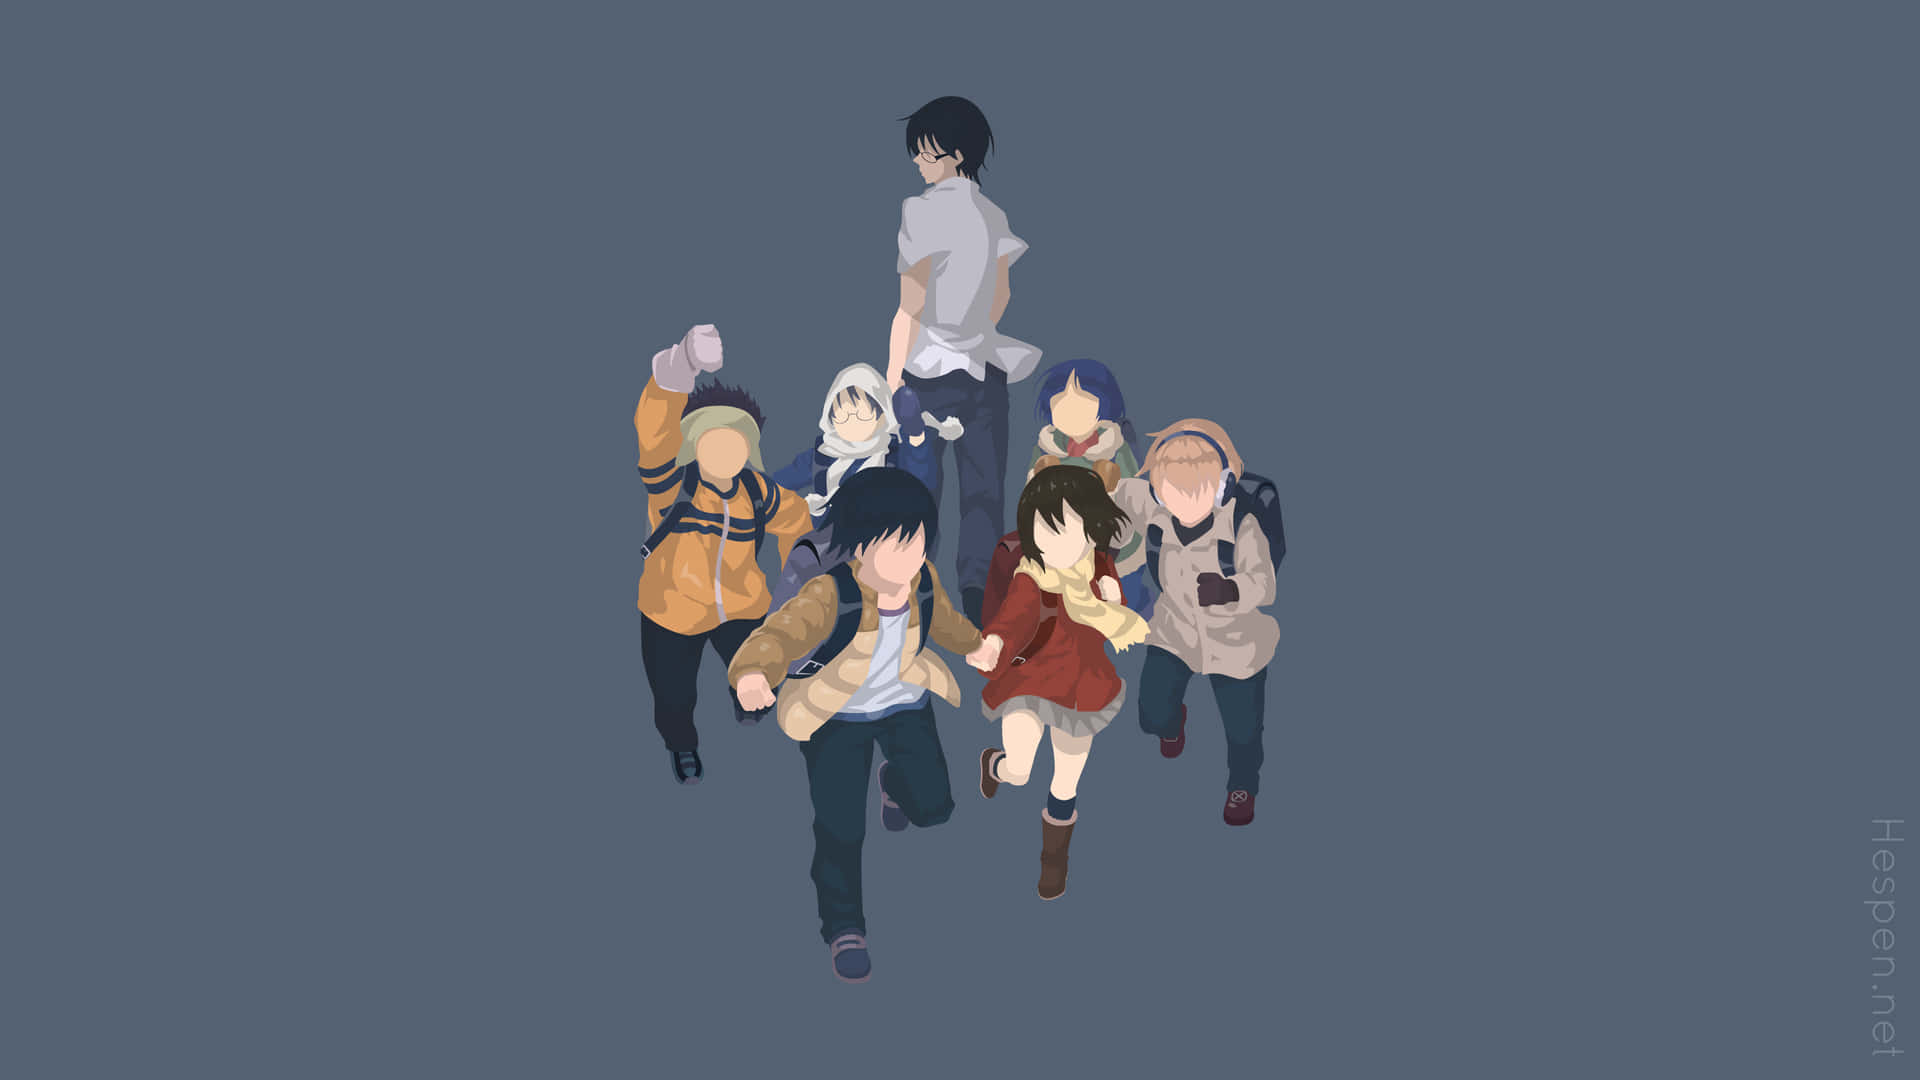 A glimpse of the Erased 4K world Wallpaper